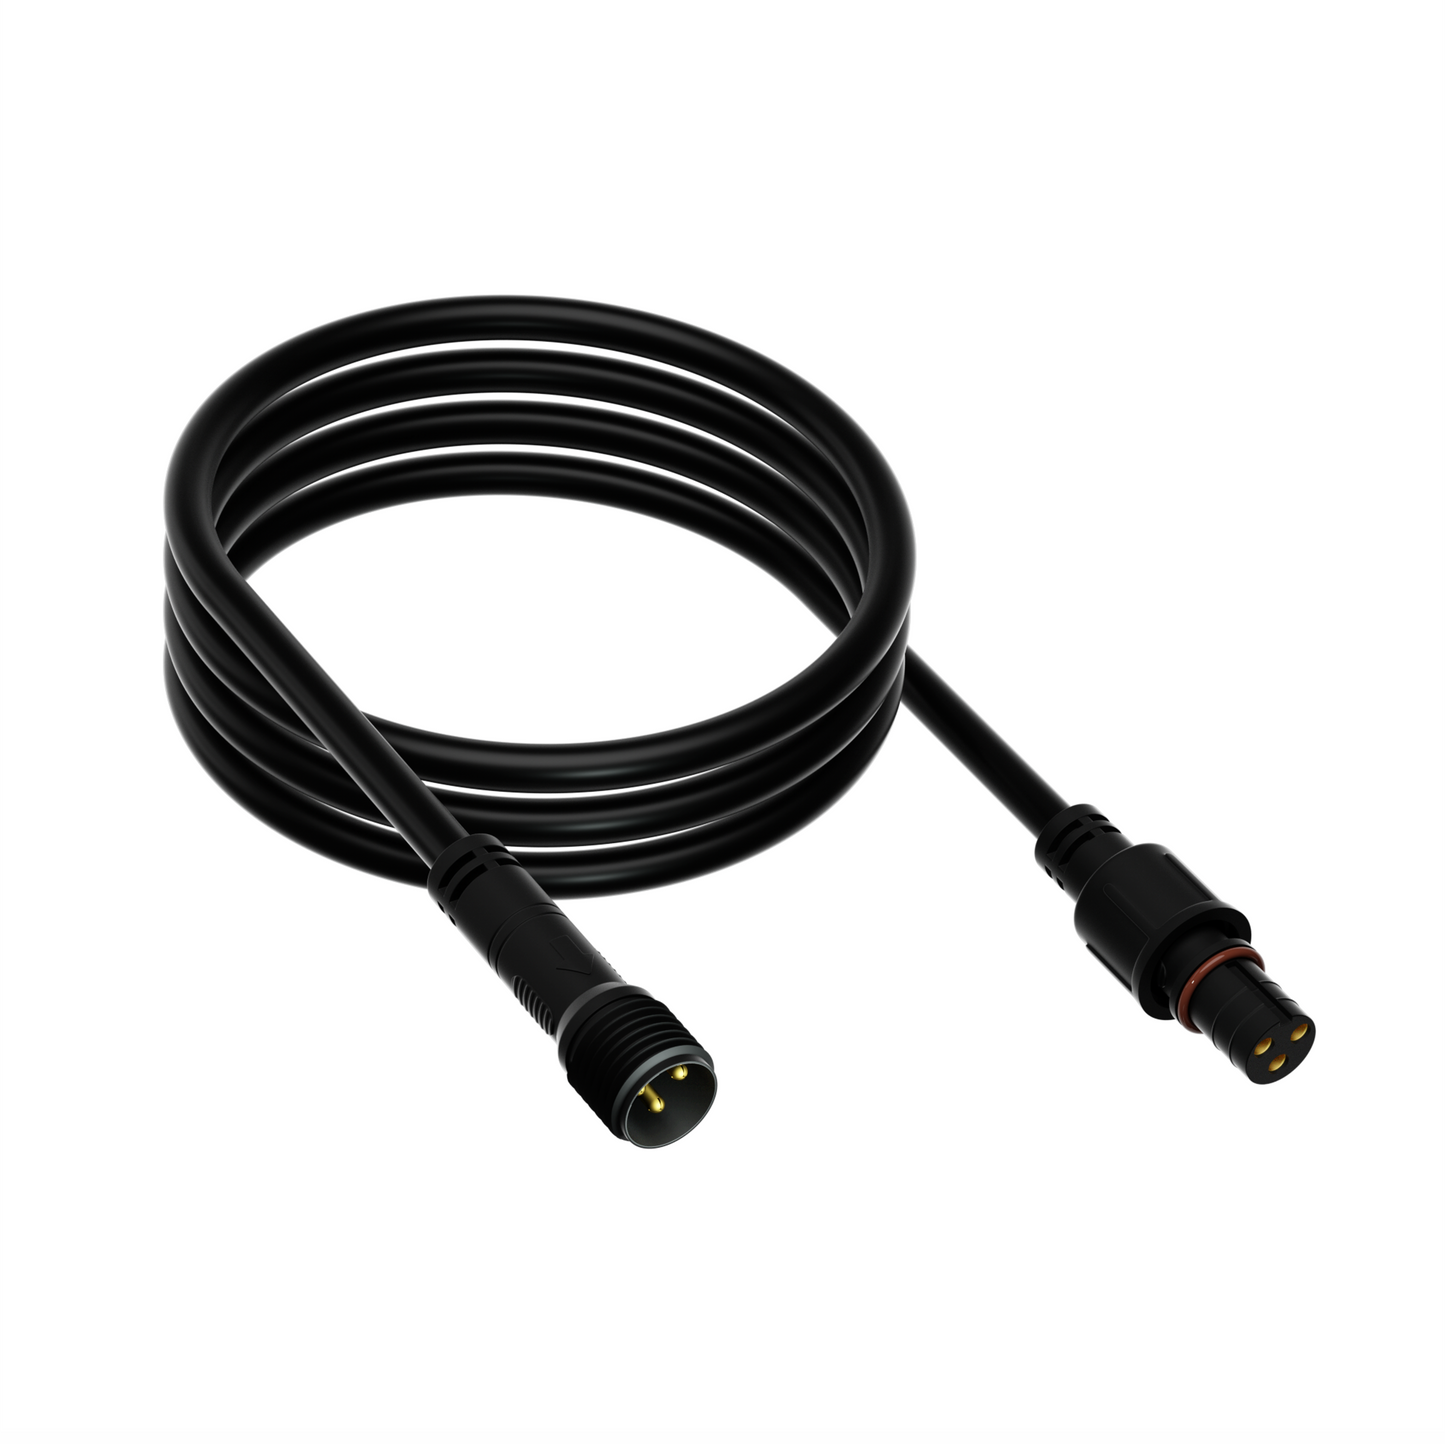 Valve Controller Valve Status Extension Cable, 10-Foot, 3 Pin